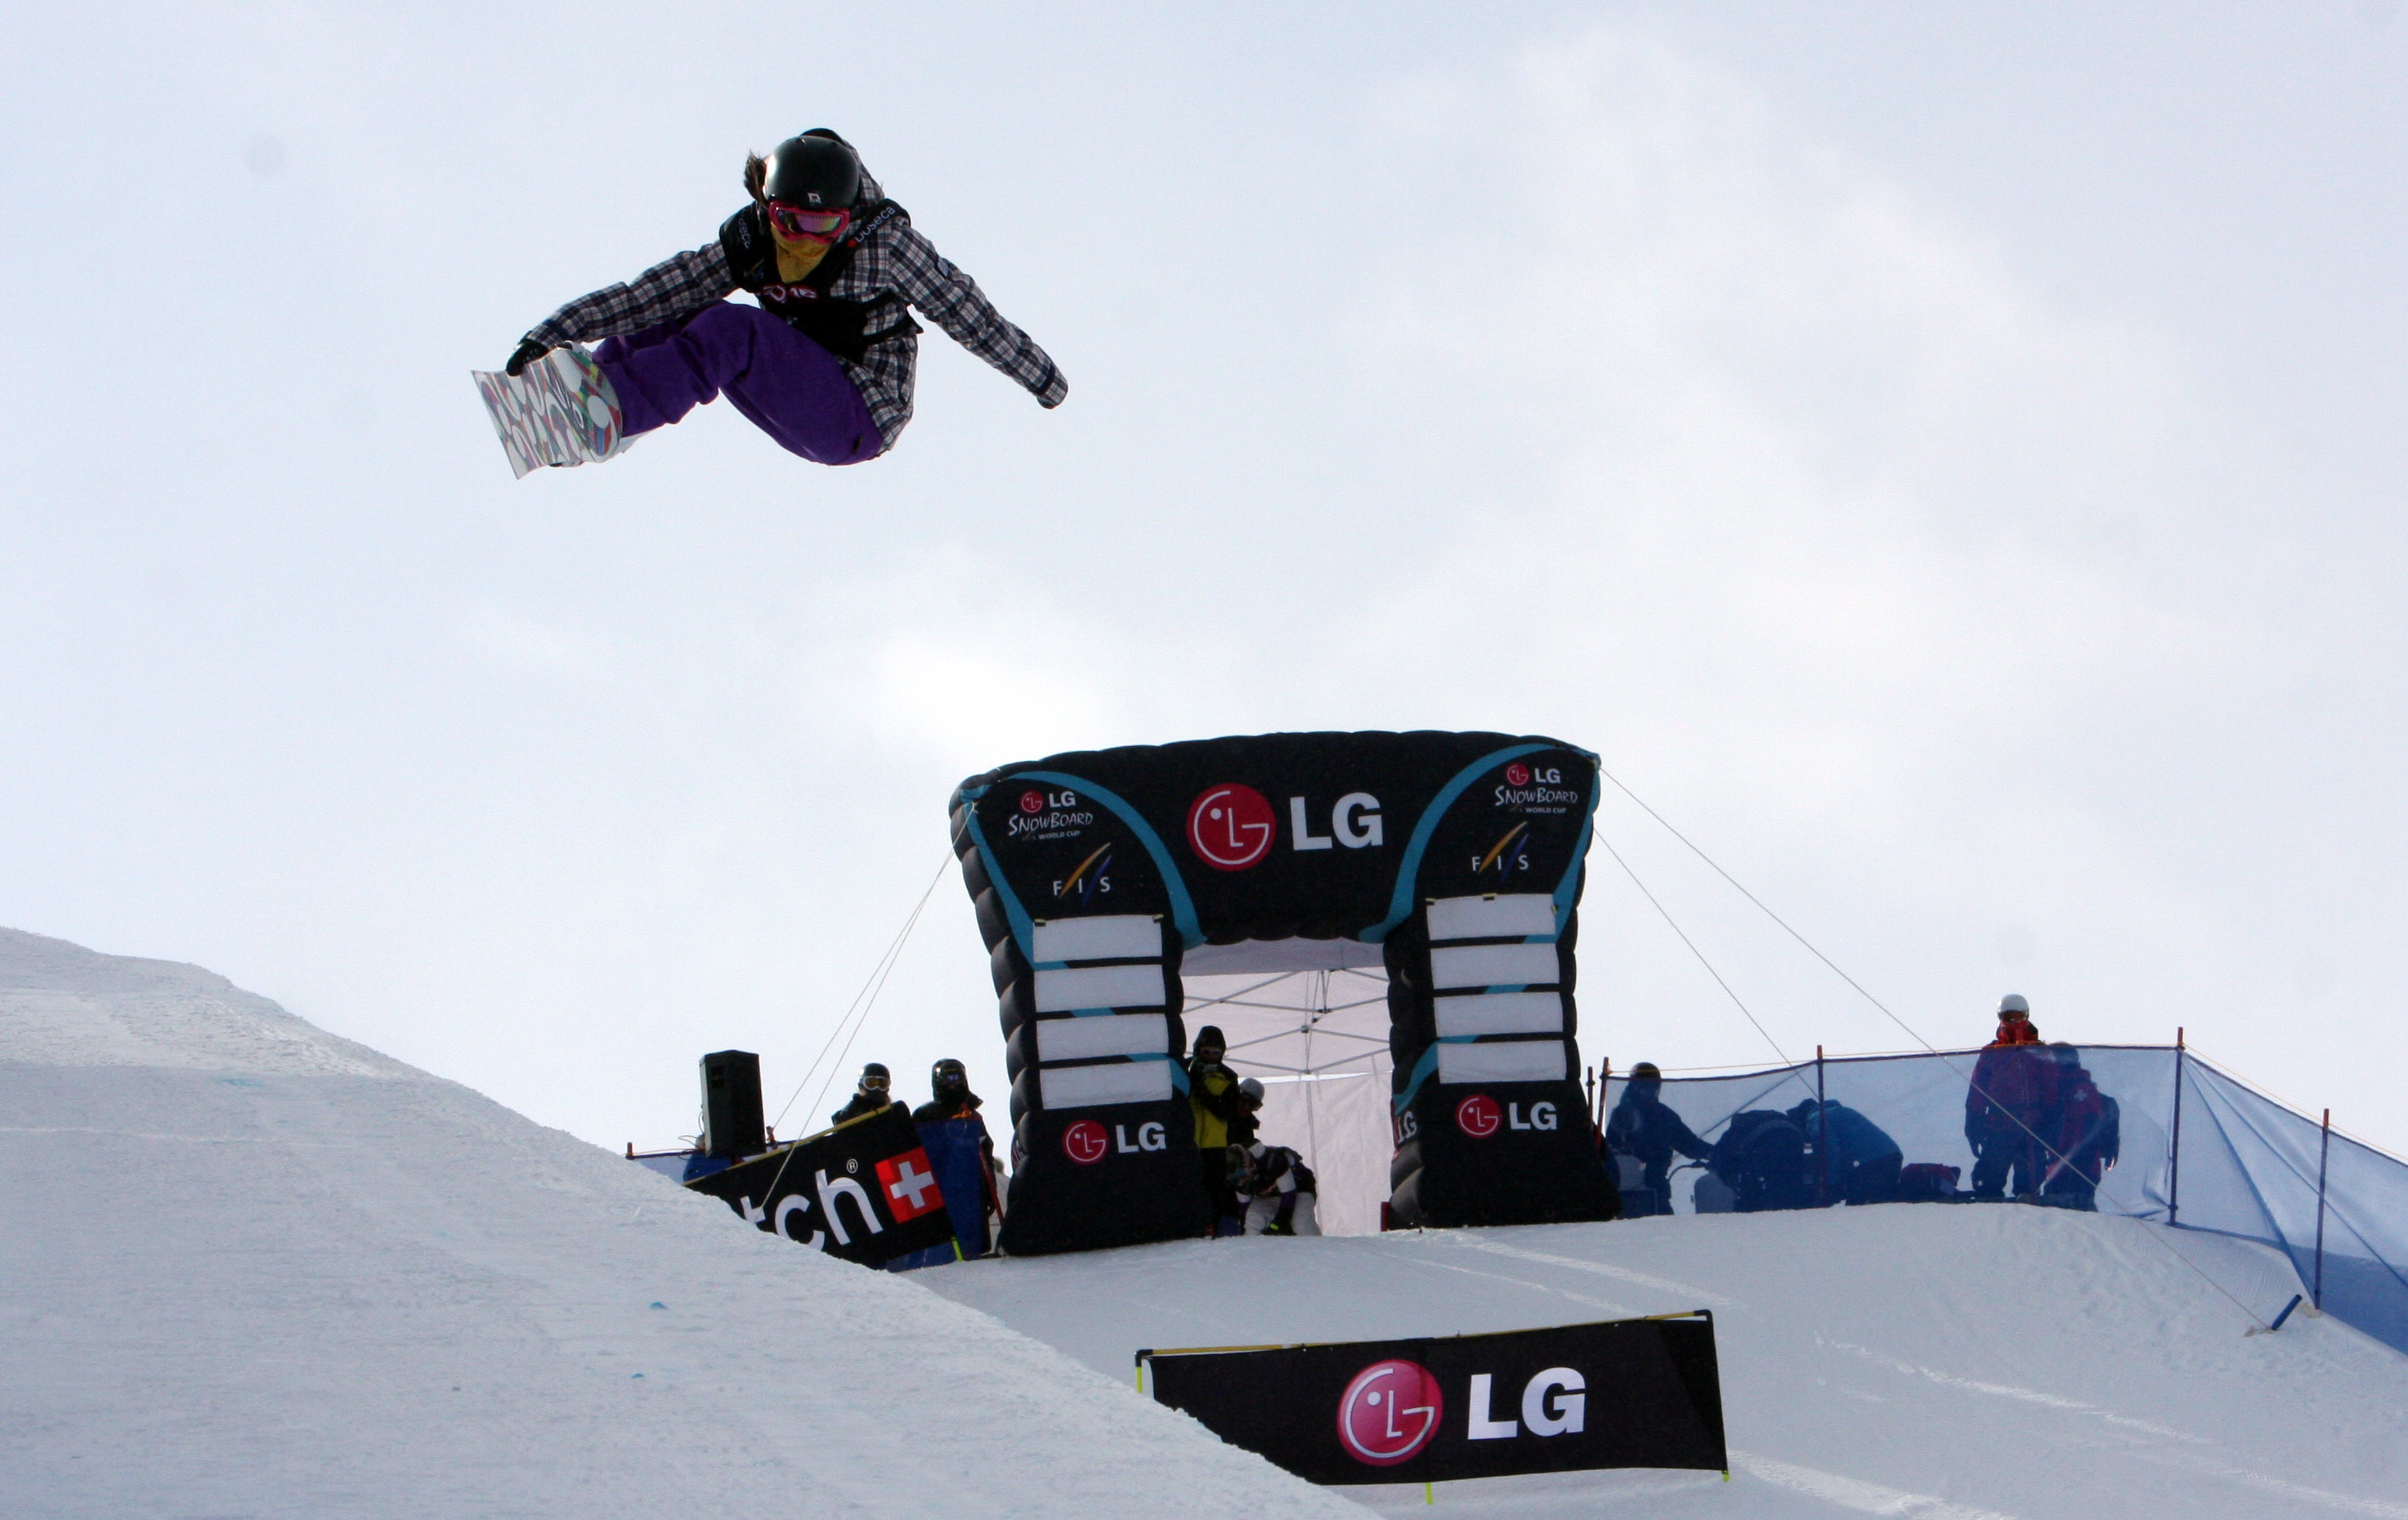 A snowboarder jumps above the LG Electronics stands